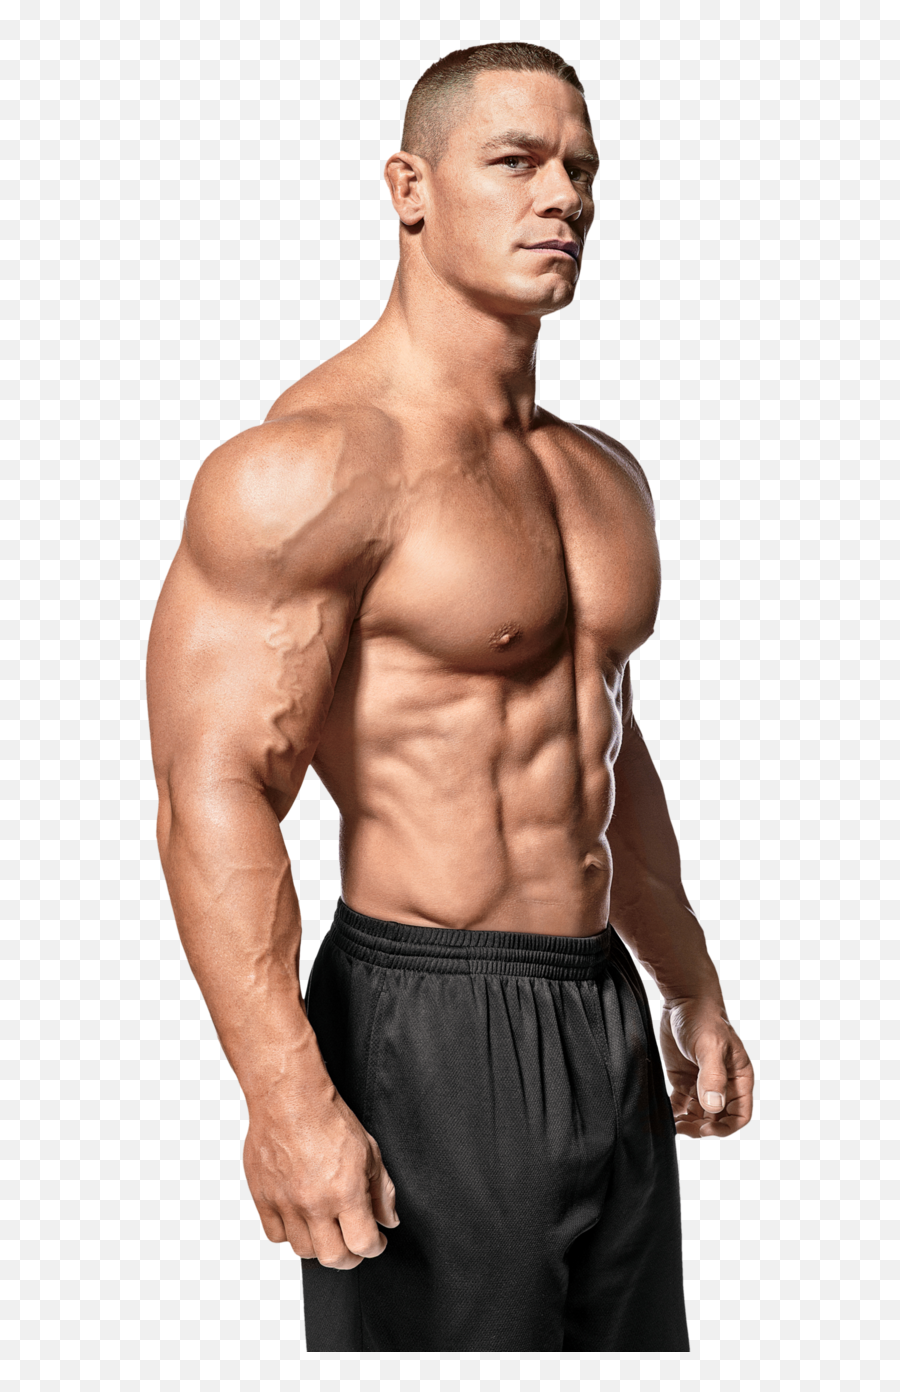 John Cena And Fitness Muscle Man Clip Art Library Download Emoji,Bodybuilders Clipart